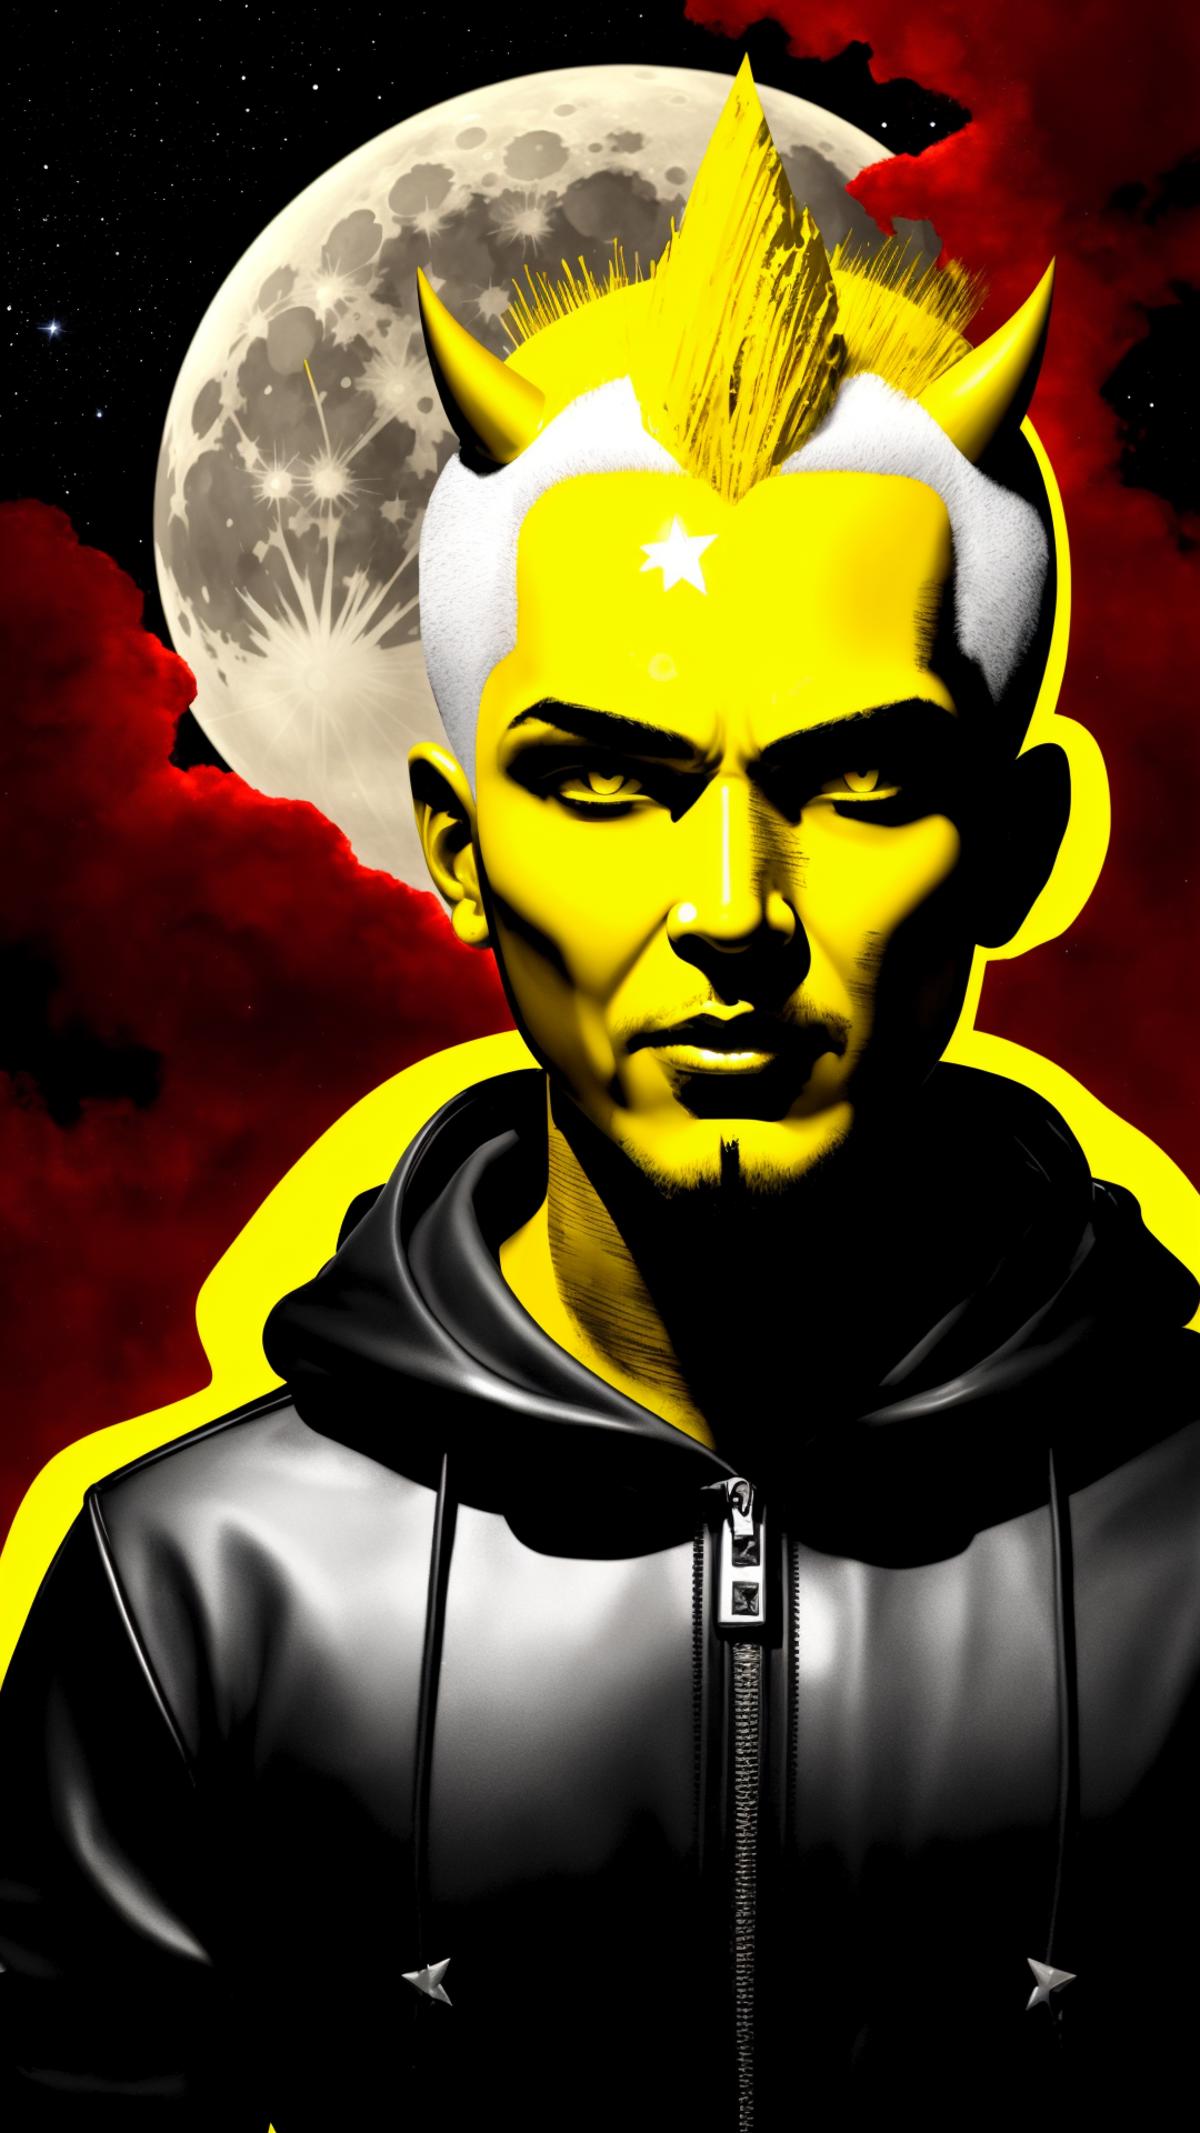 The image features a man with white hair and a yellow face, standing in front of a red backdrop. He appears to be an animated or computer-generated character, and is wearing a black hooded sweatshirt. The man is staring directly into the camera, creating a striking visual effect.